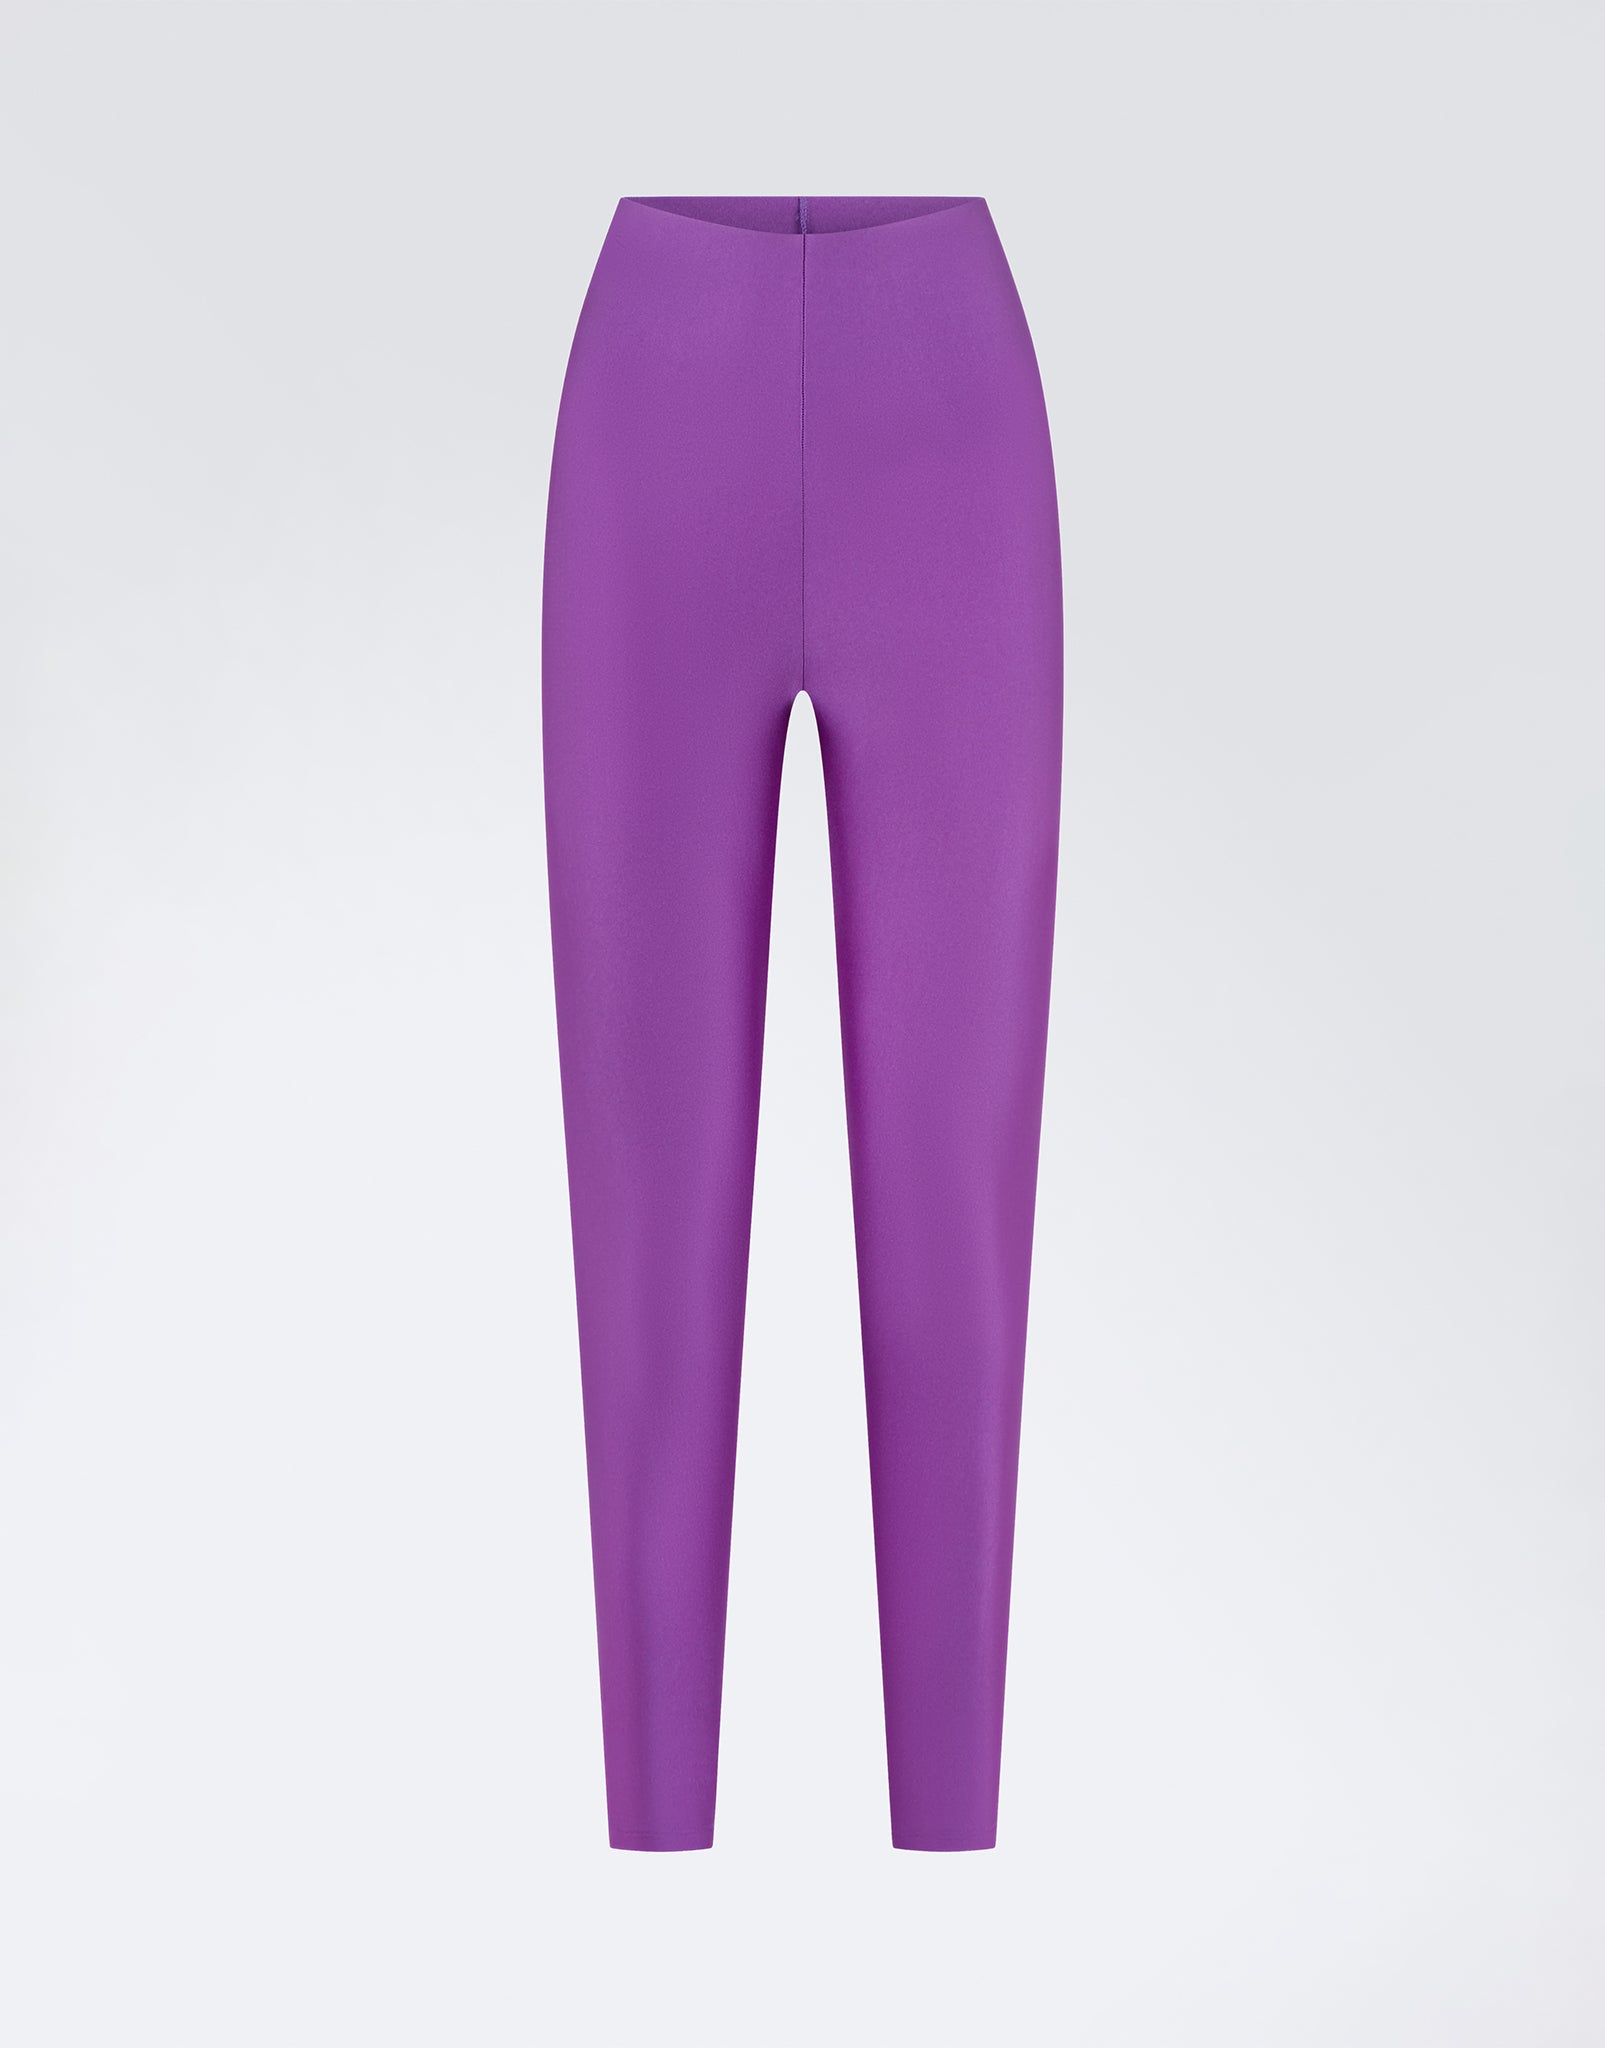 The Andamane Holly 80s Legging in Electric Blue